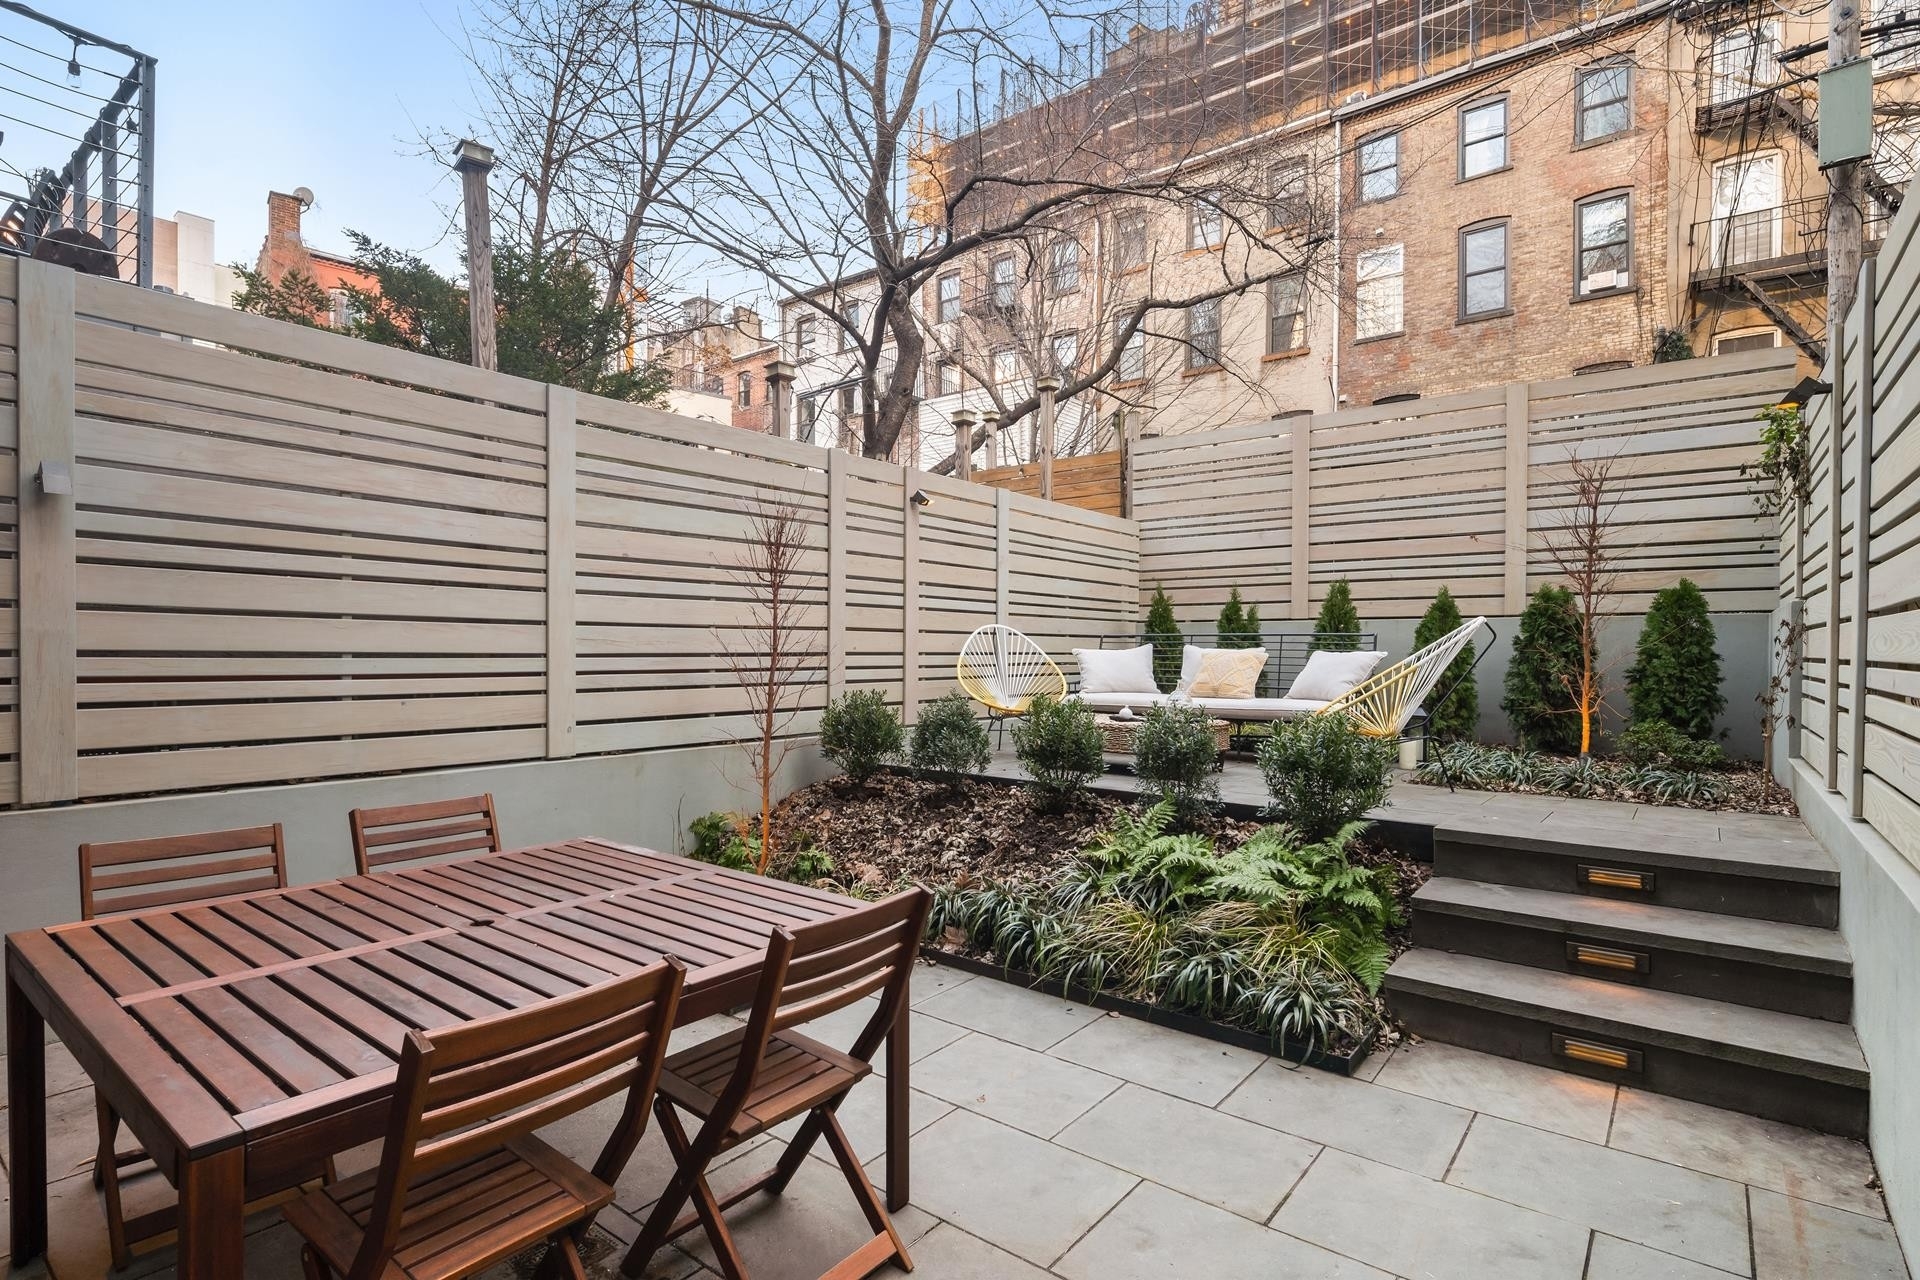 4. Single Family Townhouse for Sale at 17 ST FELIX ST, TOWNHOUSE Fort Greene, Brooklyn, New York 11217